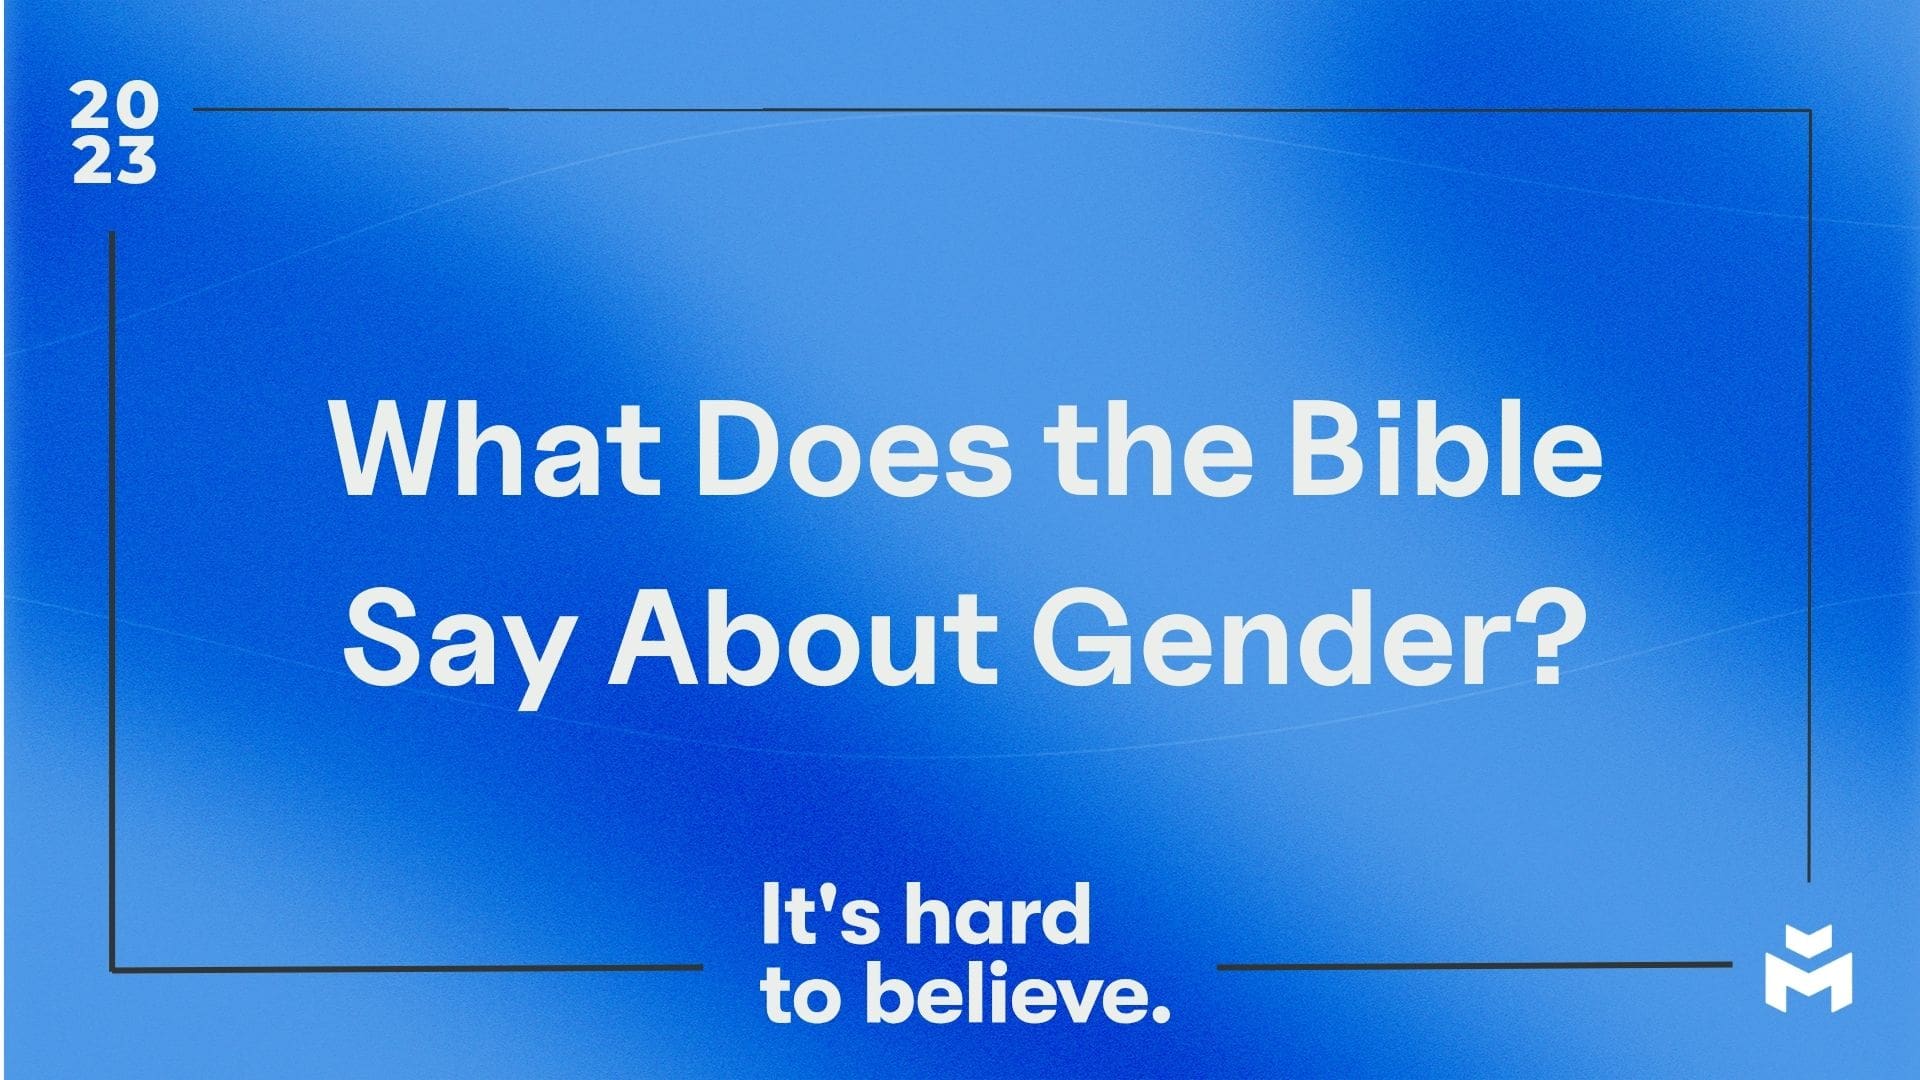 What Does the Bible Say About Gender?